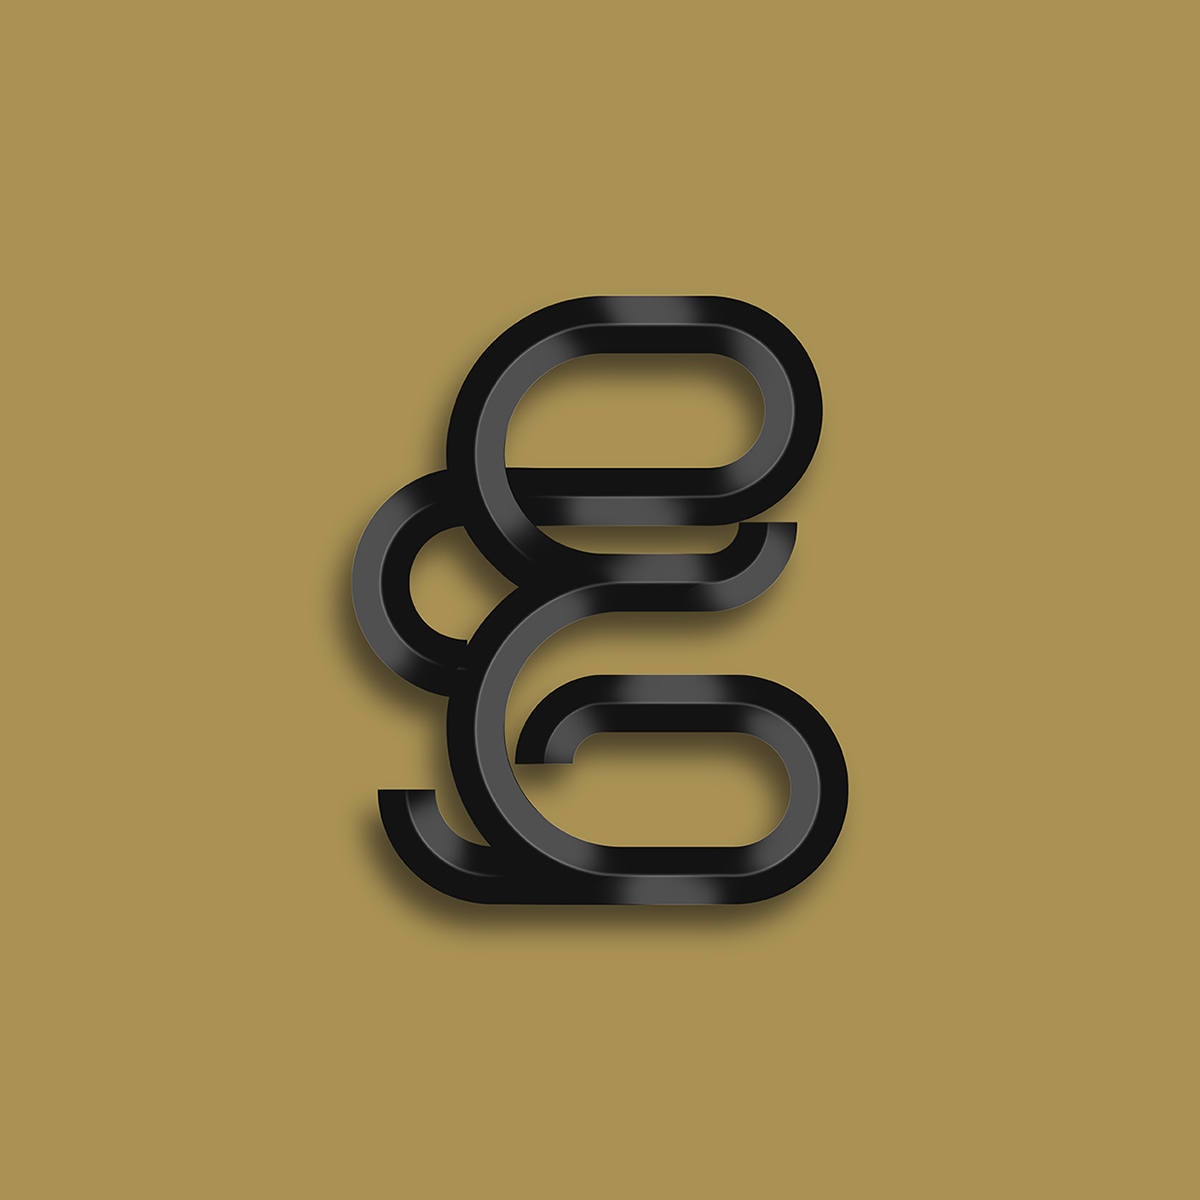 type lettering font app notegraohy wete